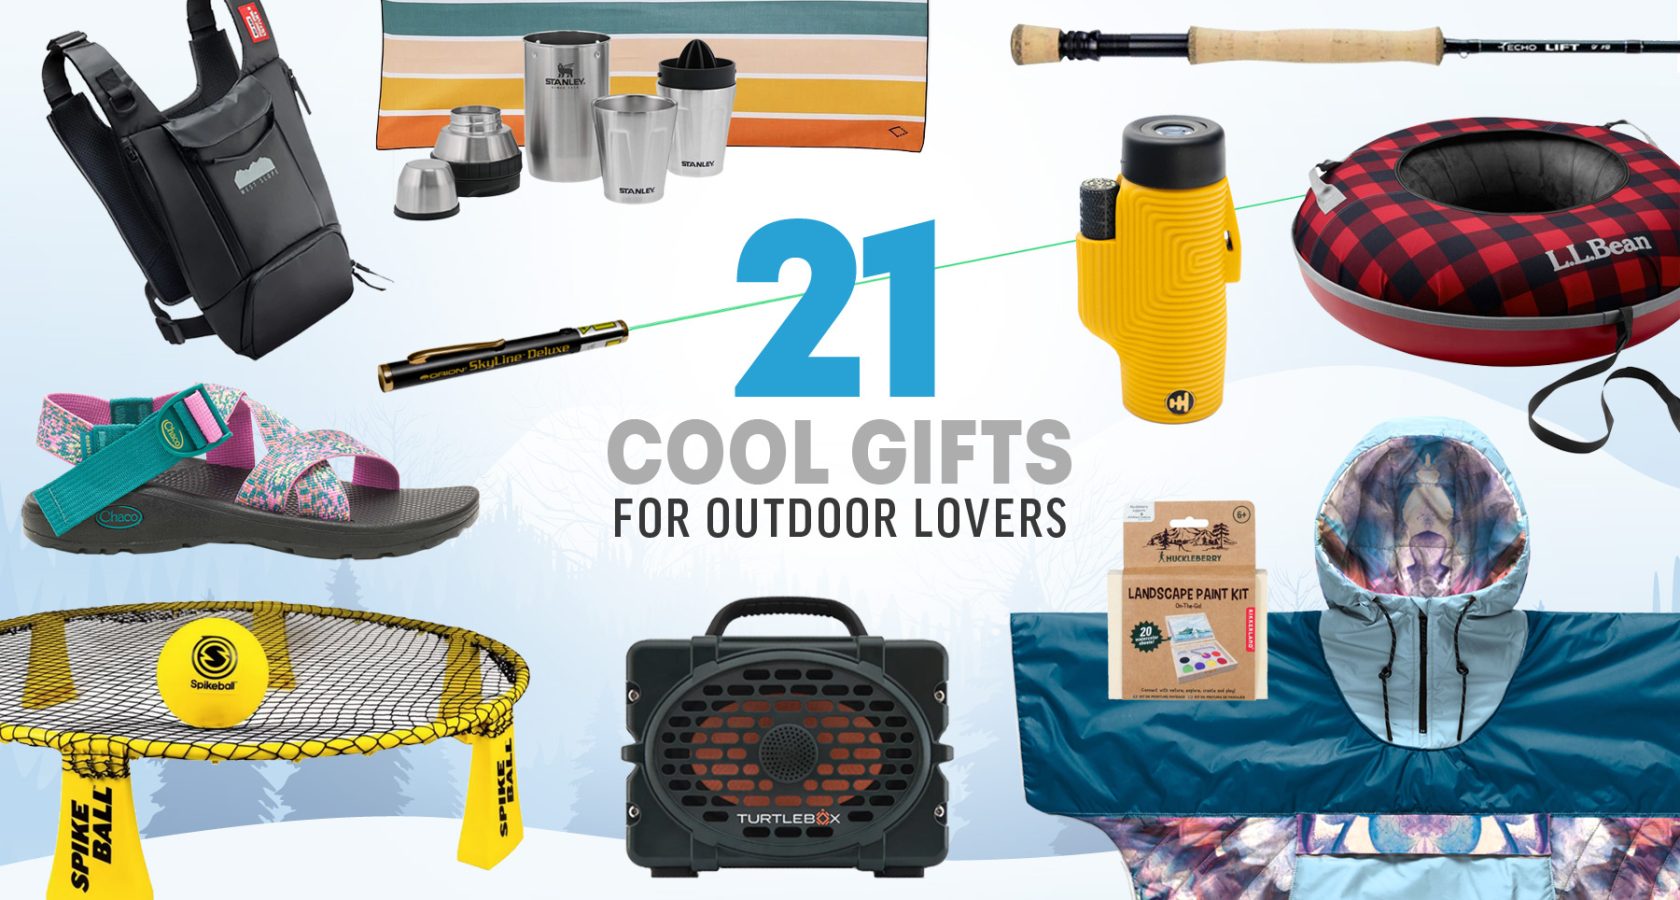 Give the Gift of Outdoor Adventure